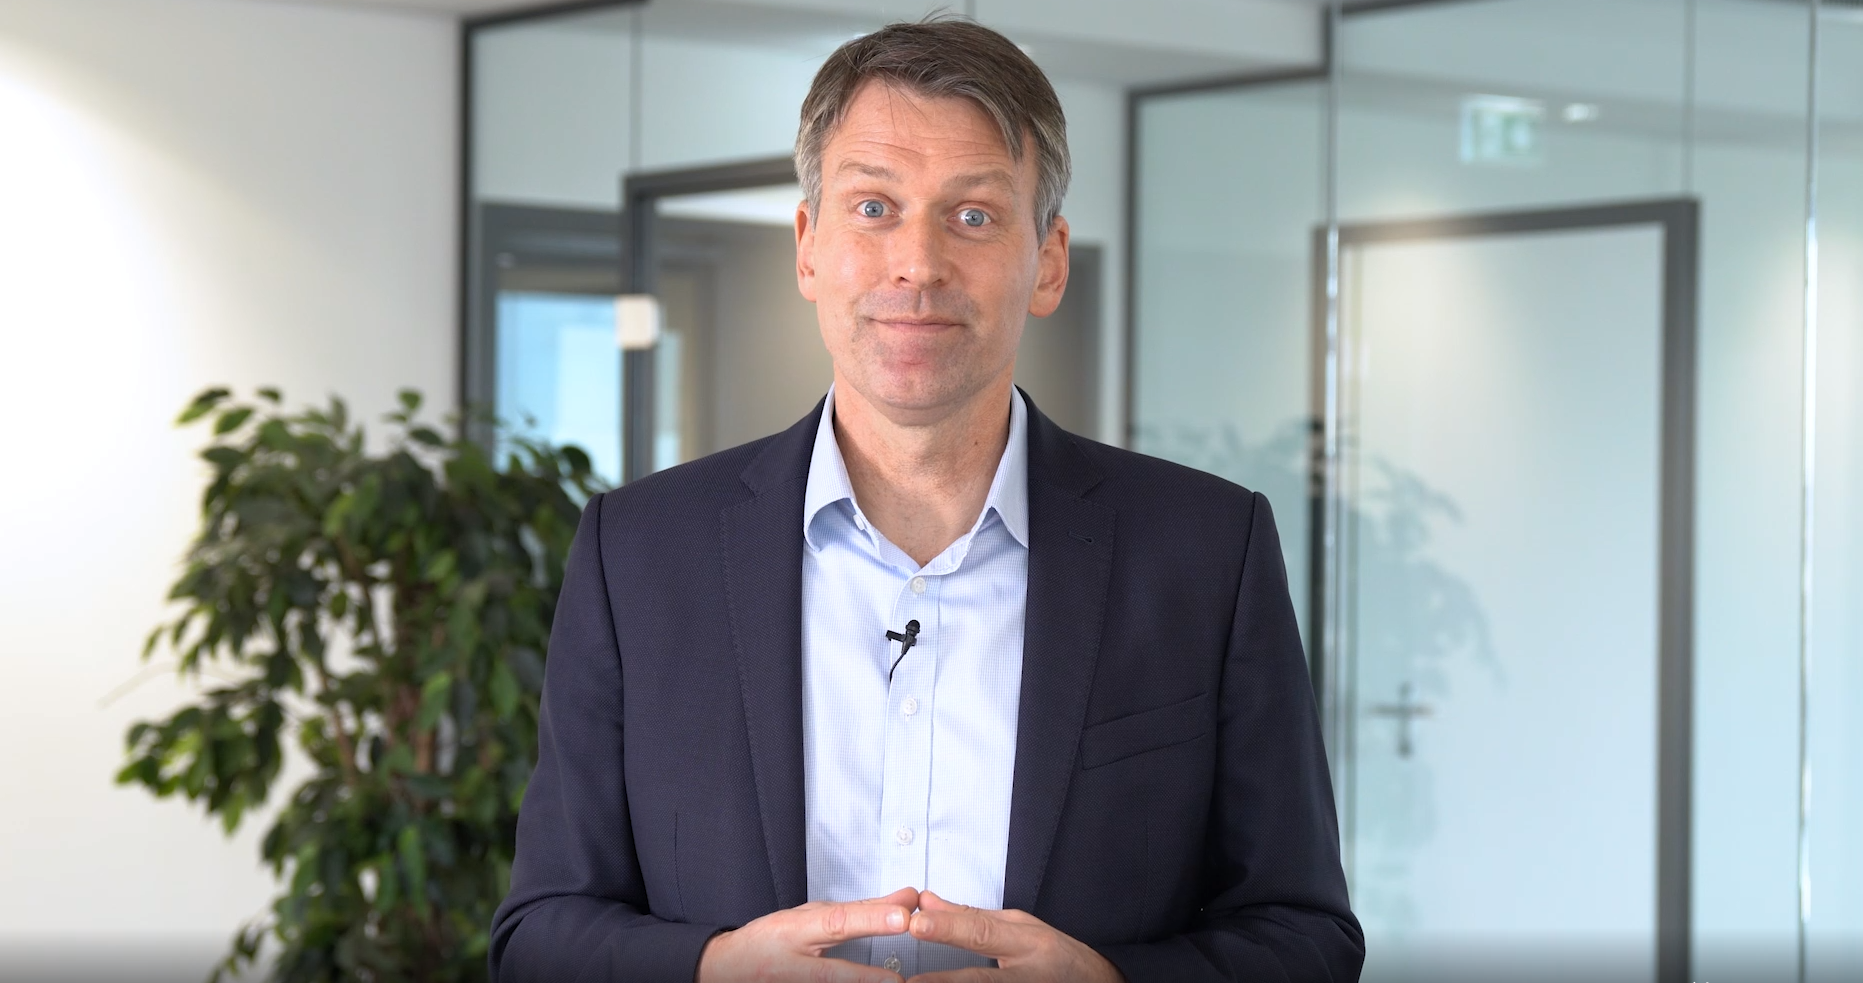 NXP’s CTO Lars Reger on Charter of Trust's contributions to cybersecurity